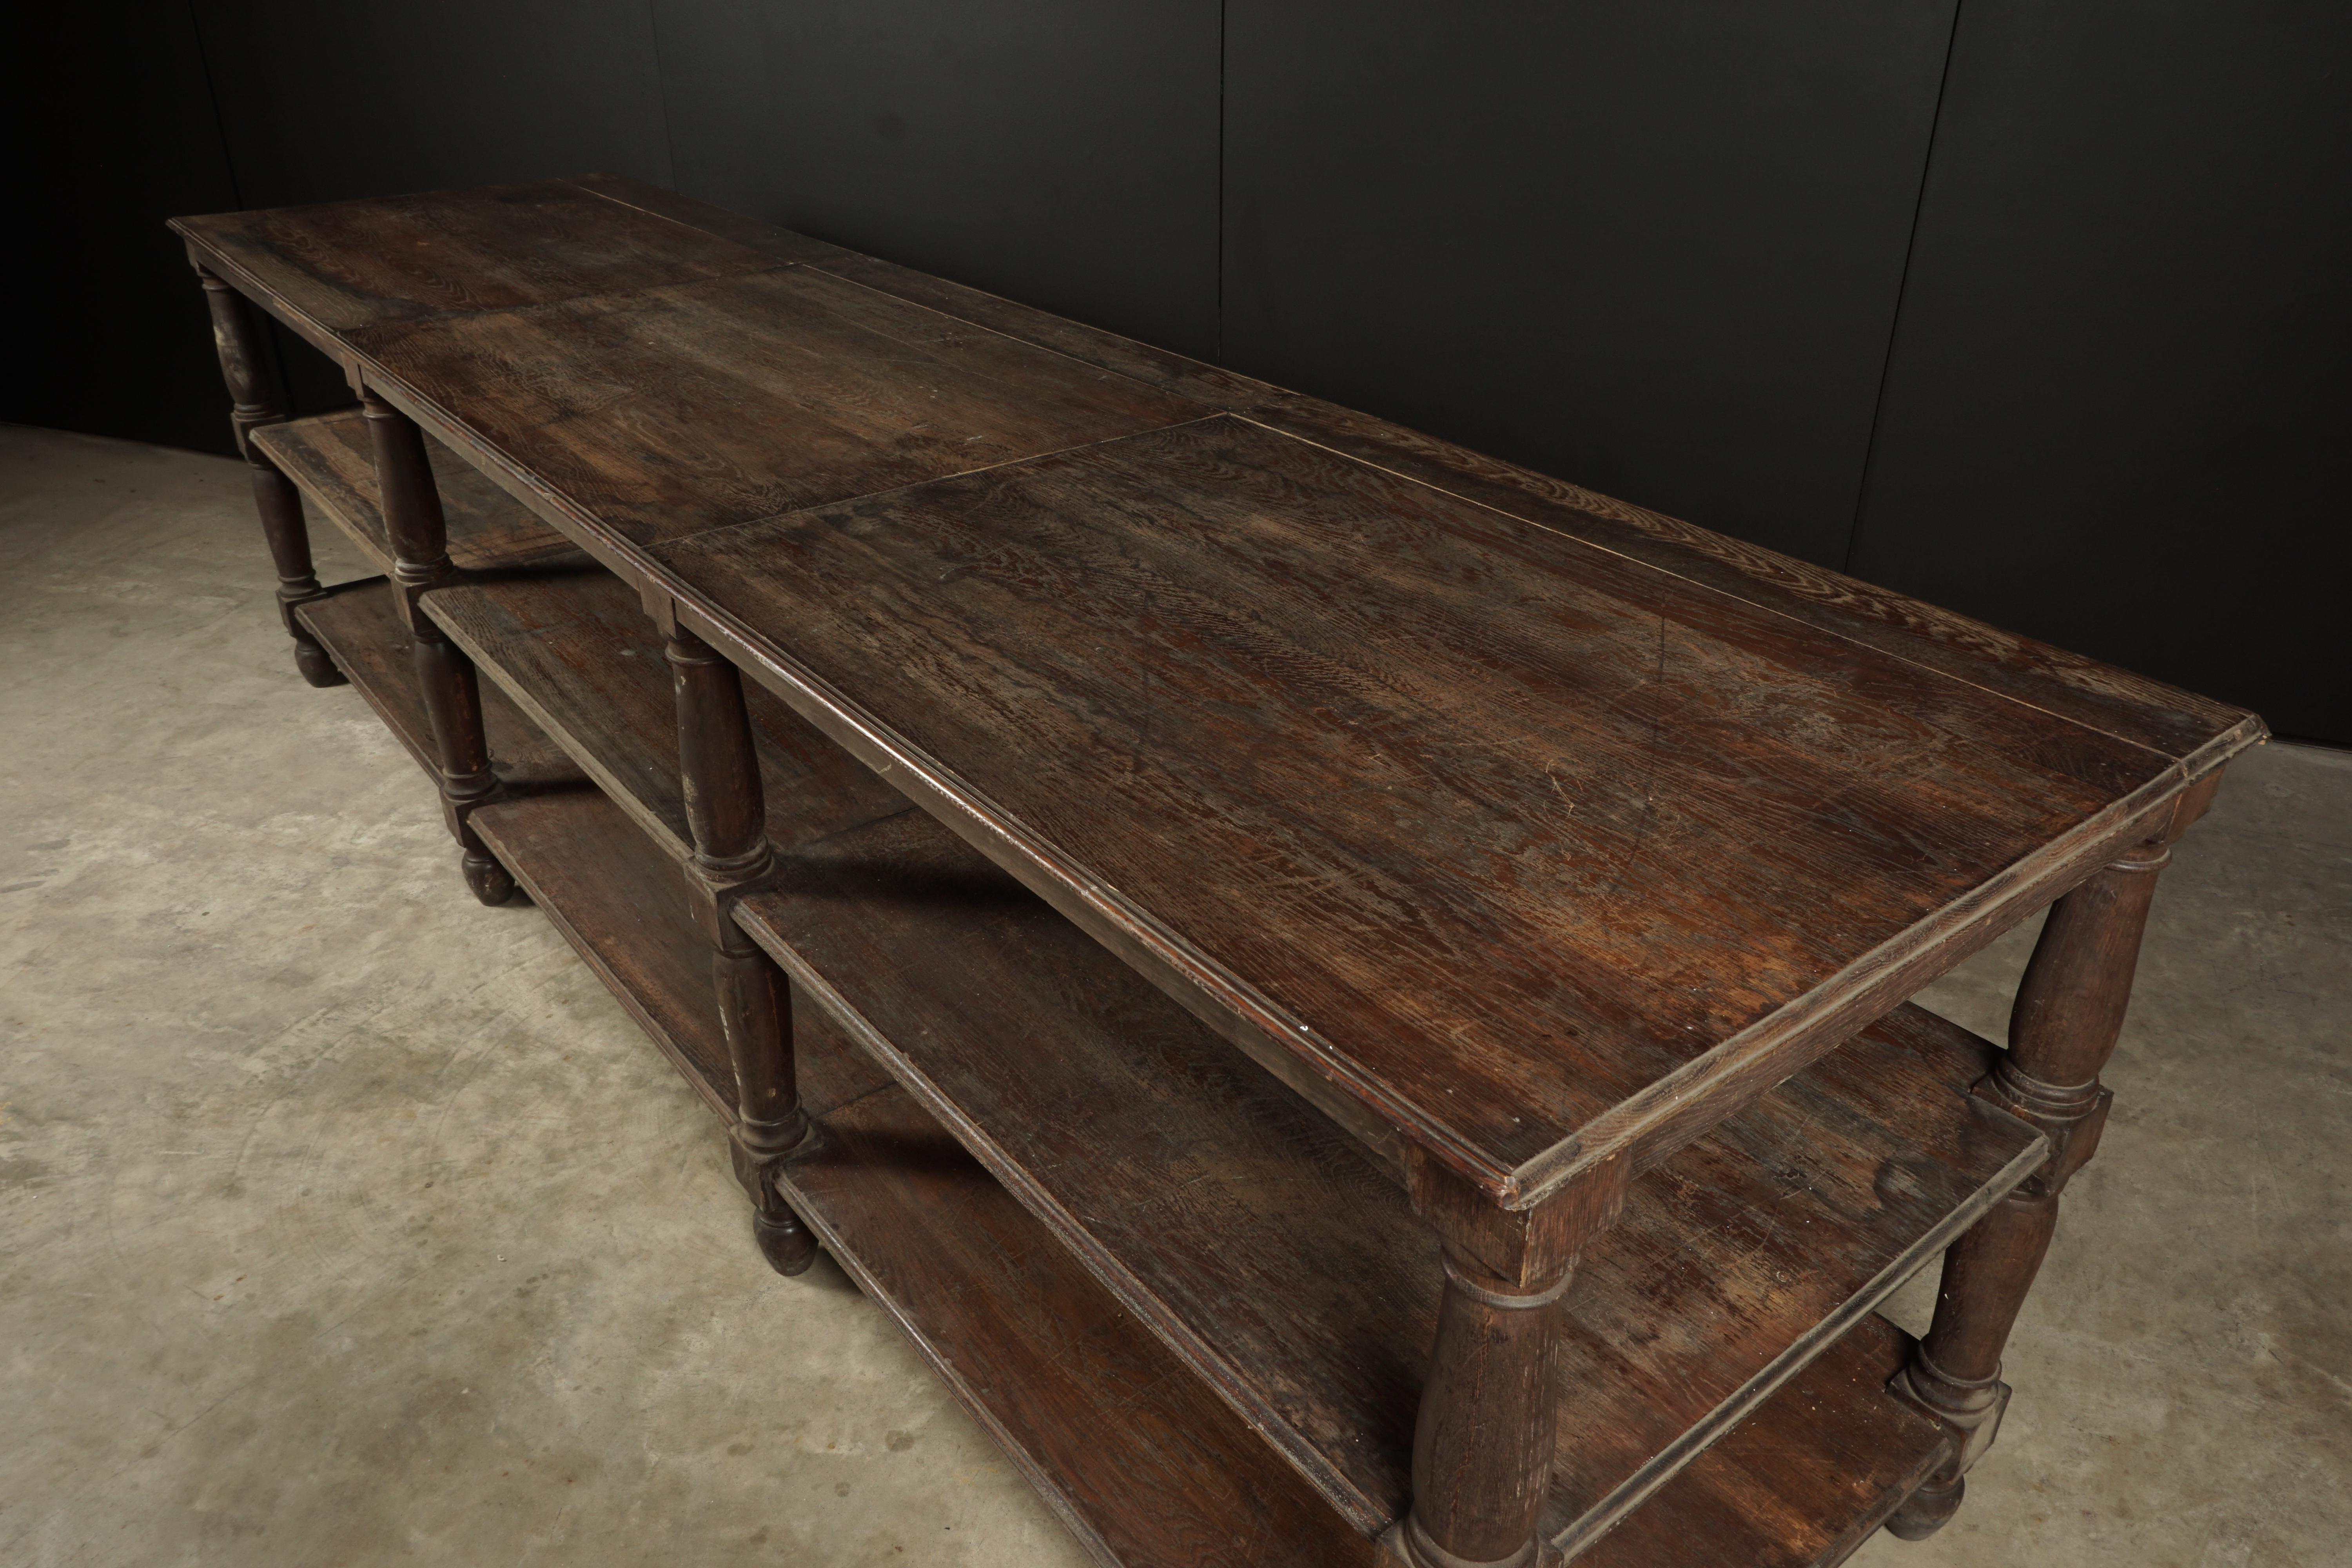 Rare extra large draper table from France, 1890s. Solid oak construction with great color and patina.